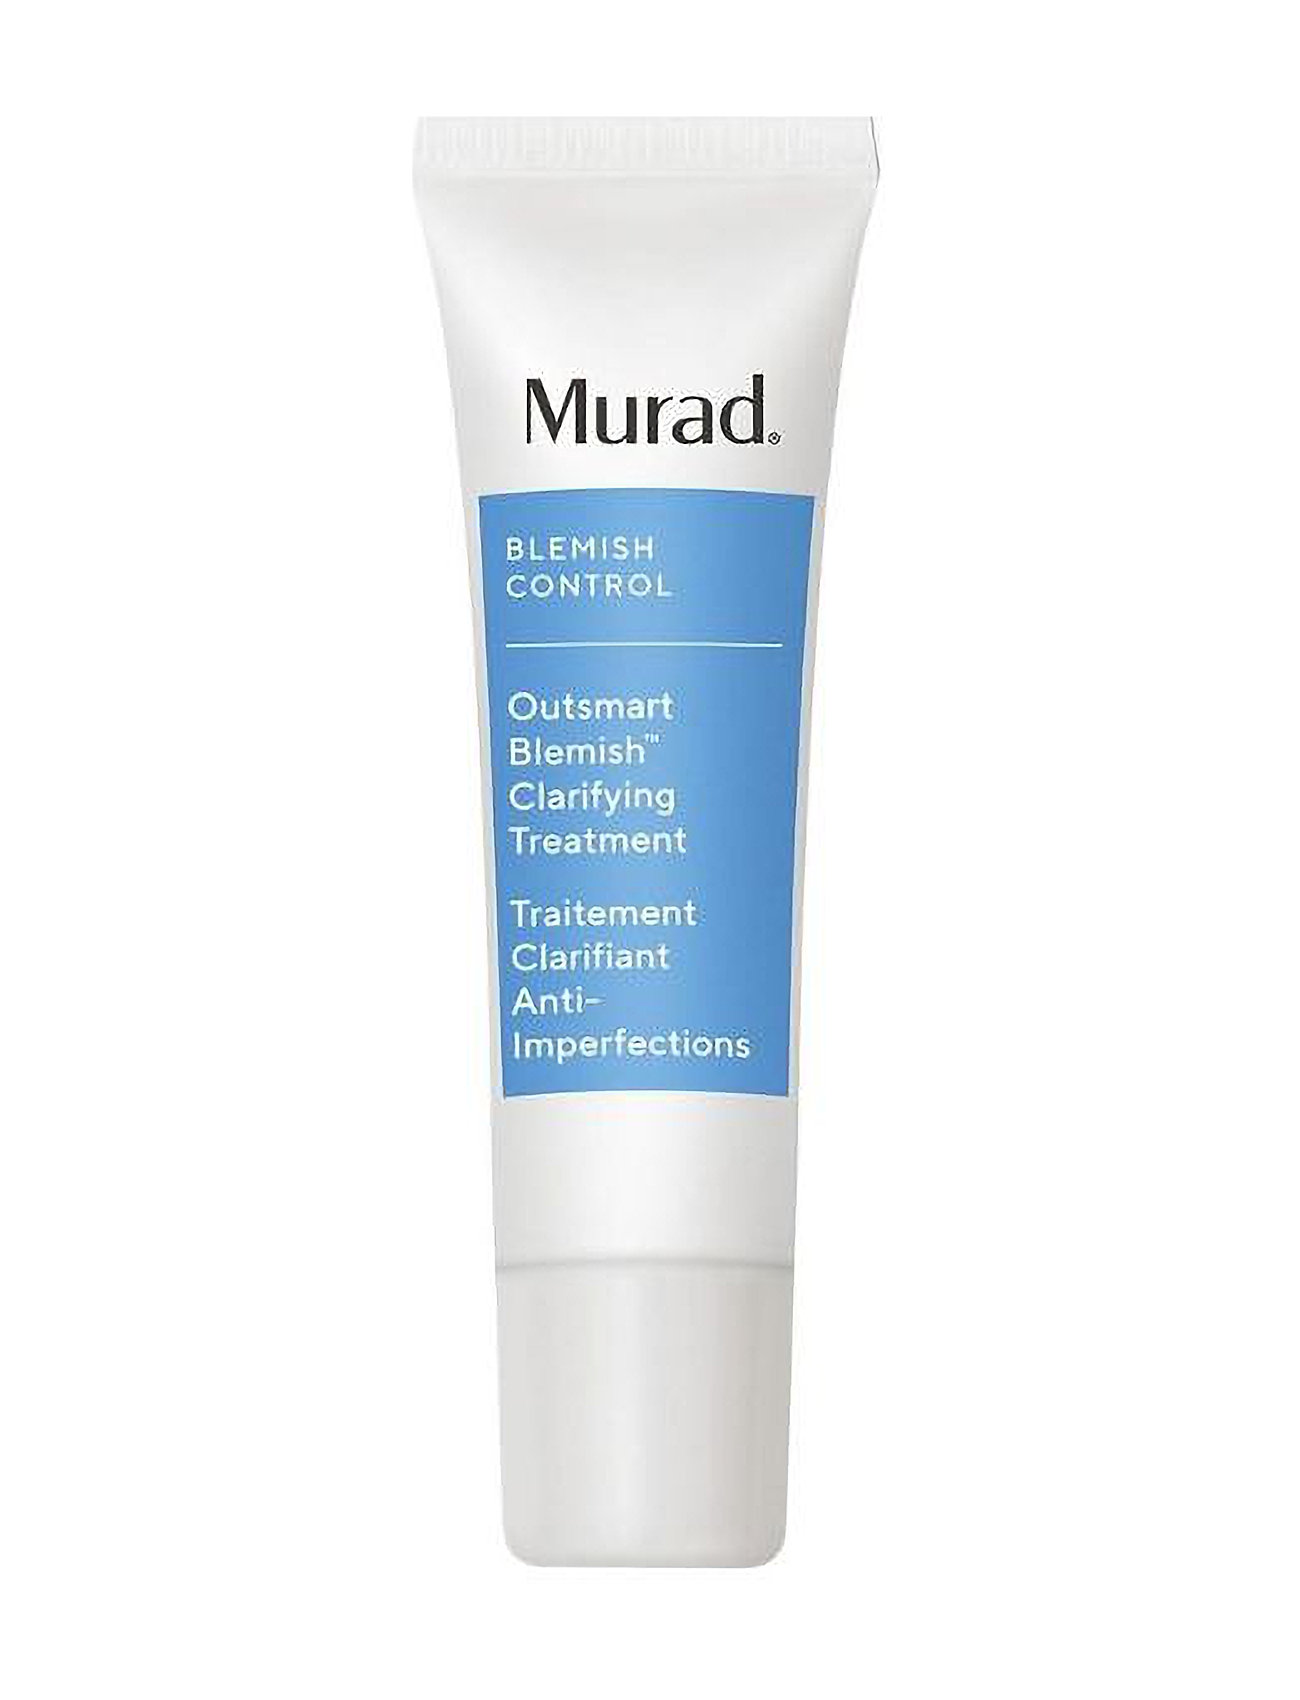 Outsmart Blemish Clarifying Treatment Beauty Women Skin Care Face Spot Treatments Nude Murad